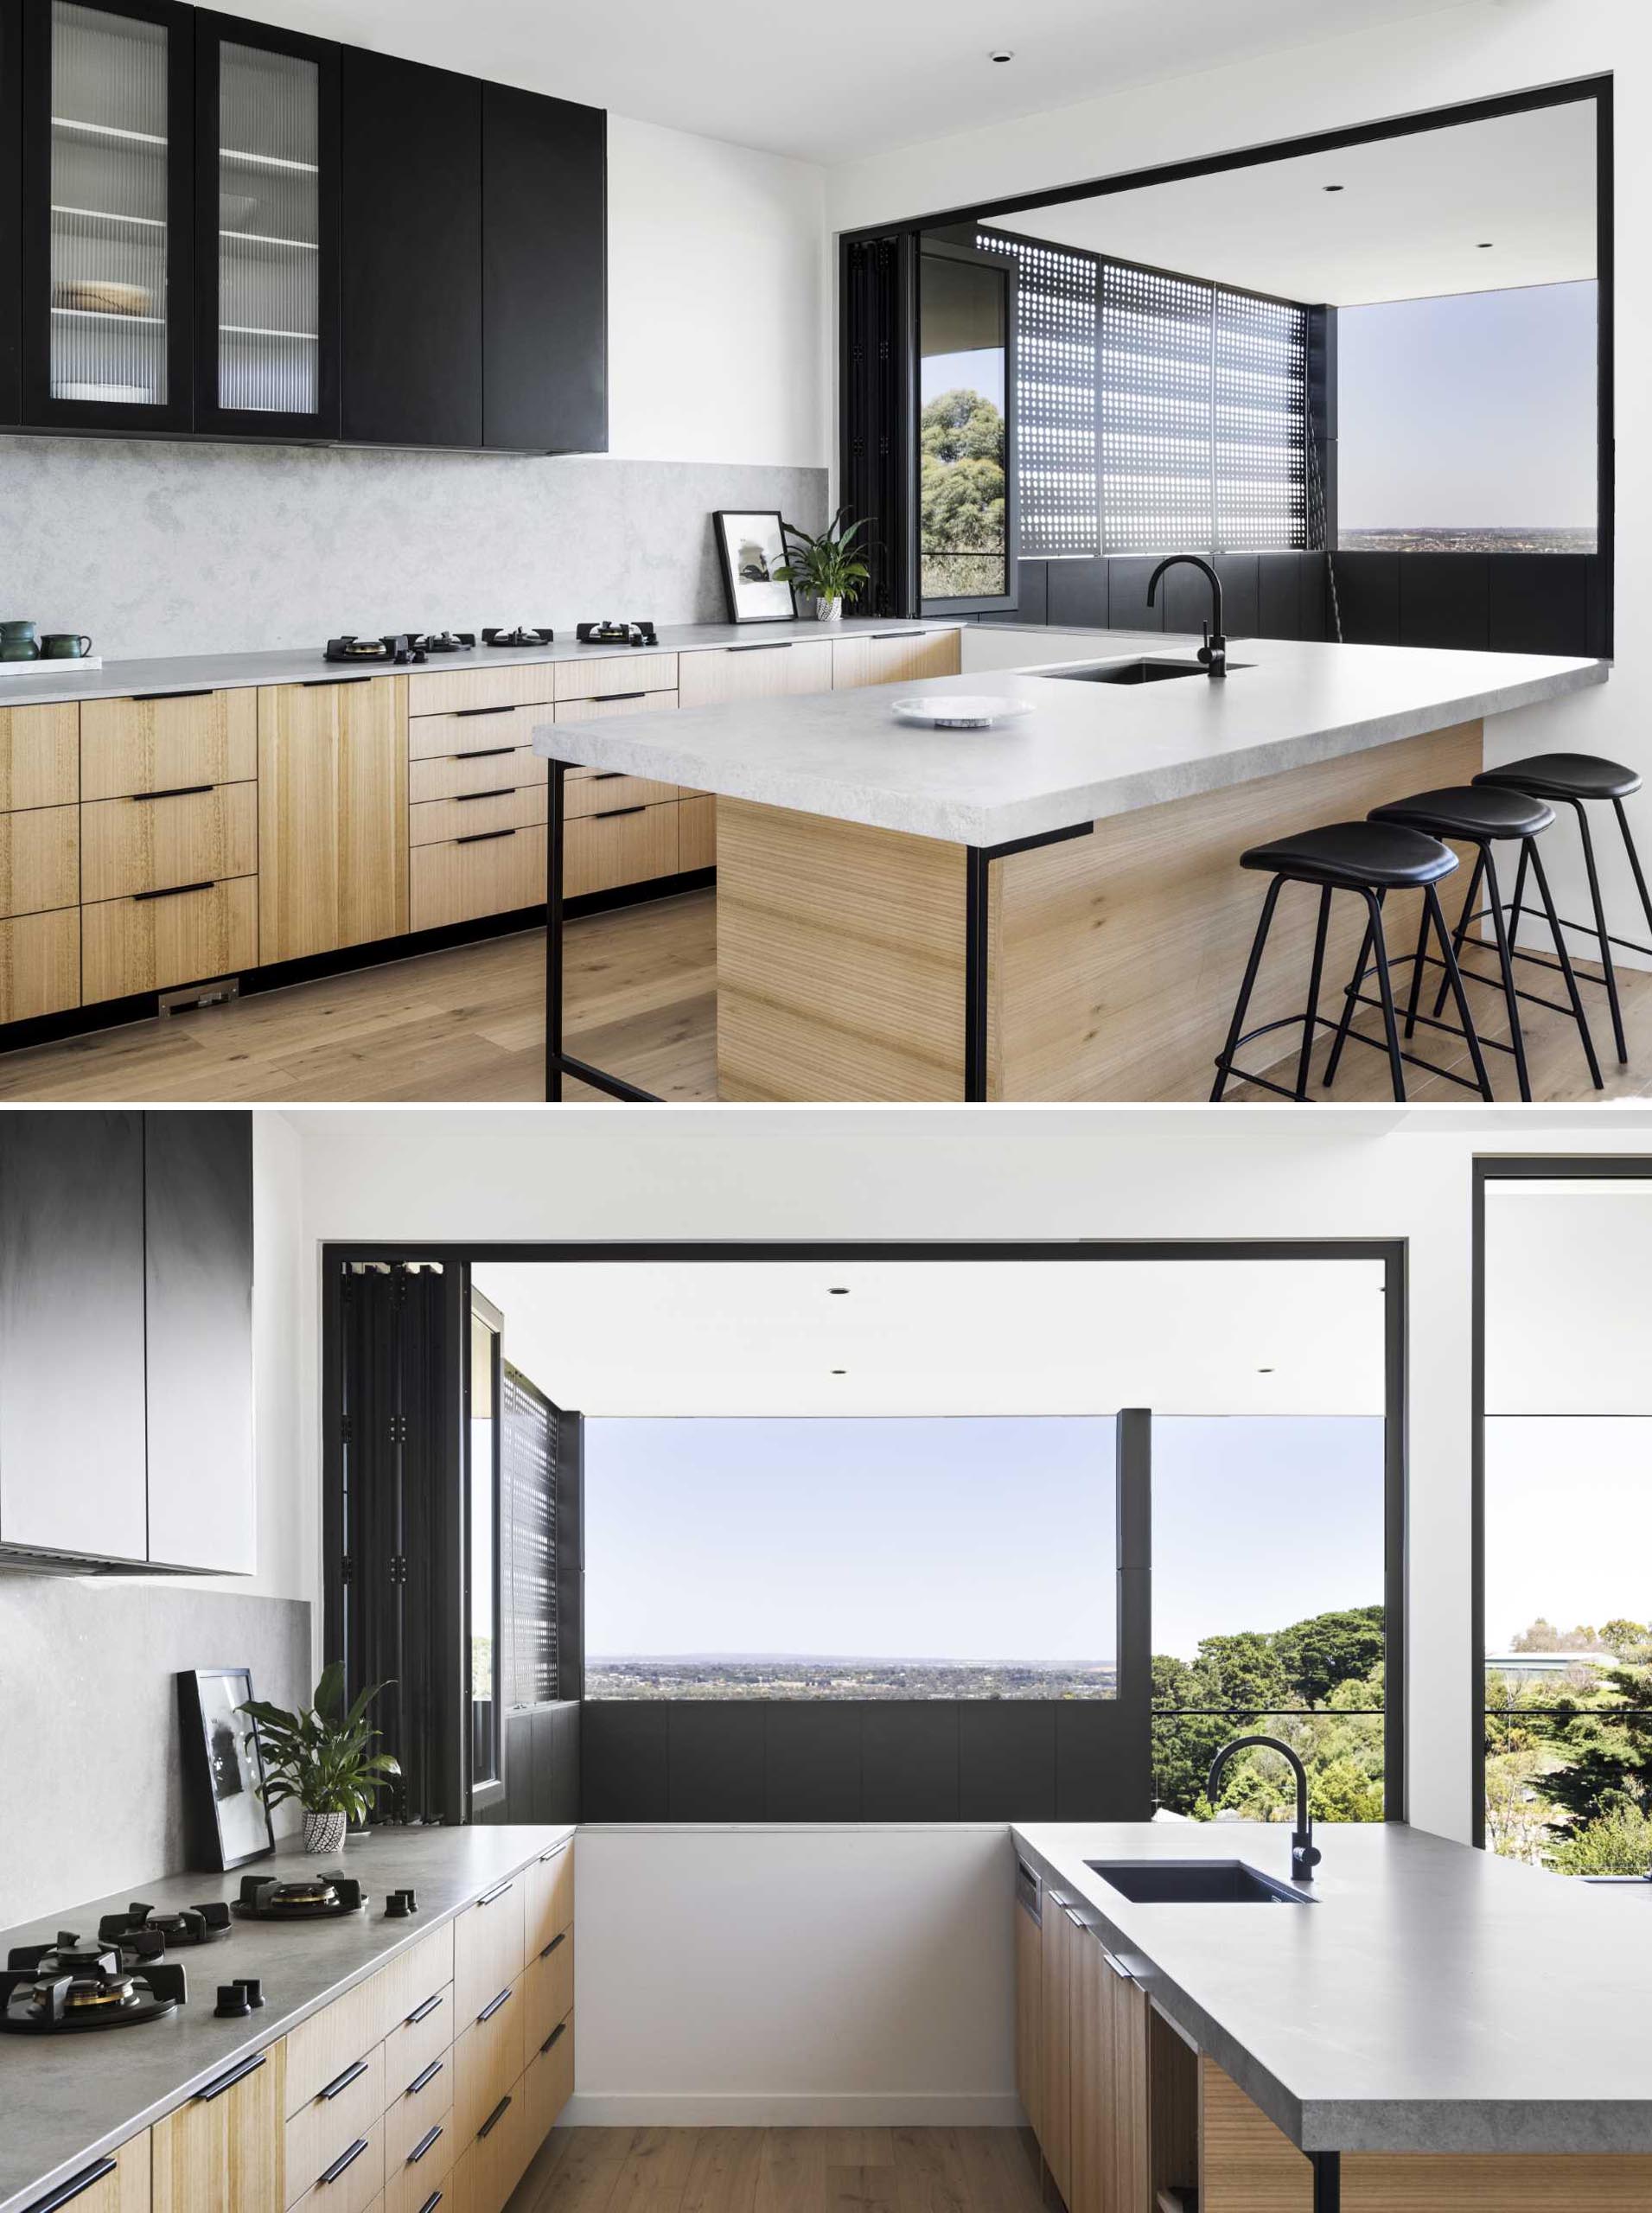 The minimalist kitchen includes both black cabinets and timber veneers in white Ash.